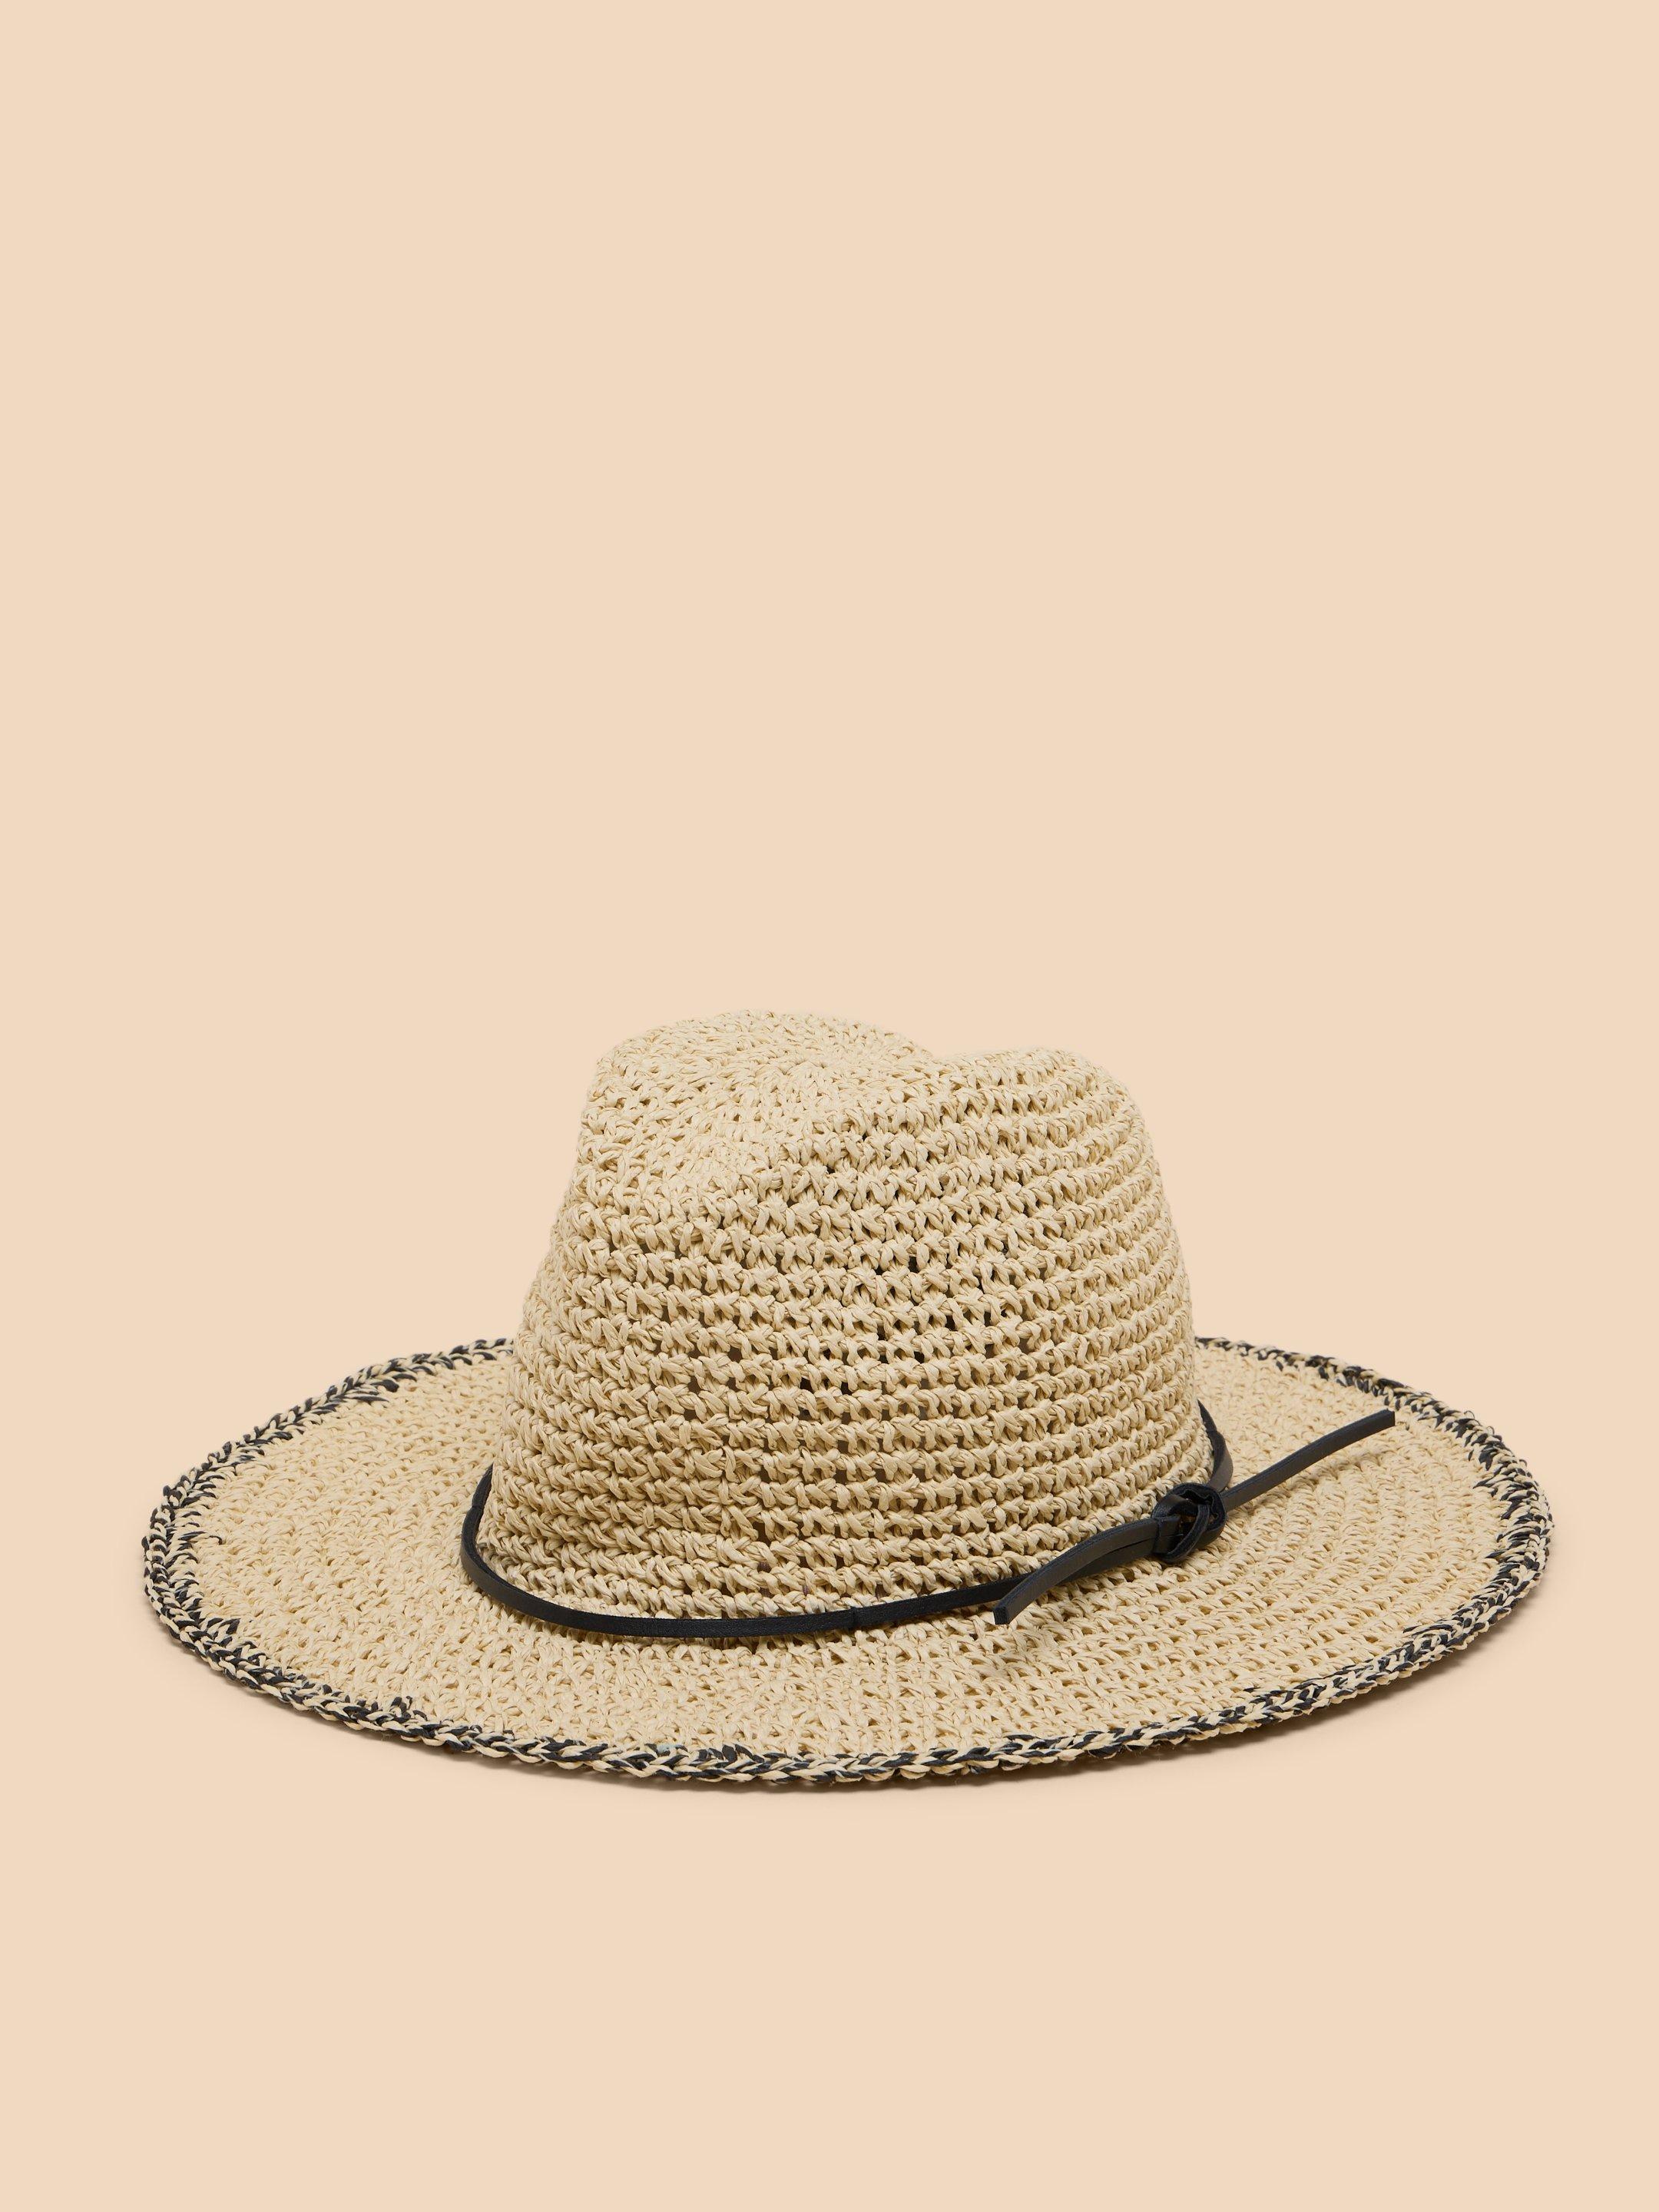 Summer Straw Fedora in NAT MLT - FLAT FRONT